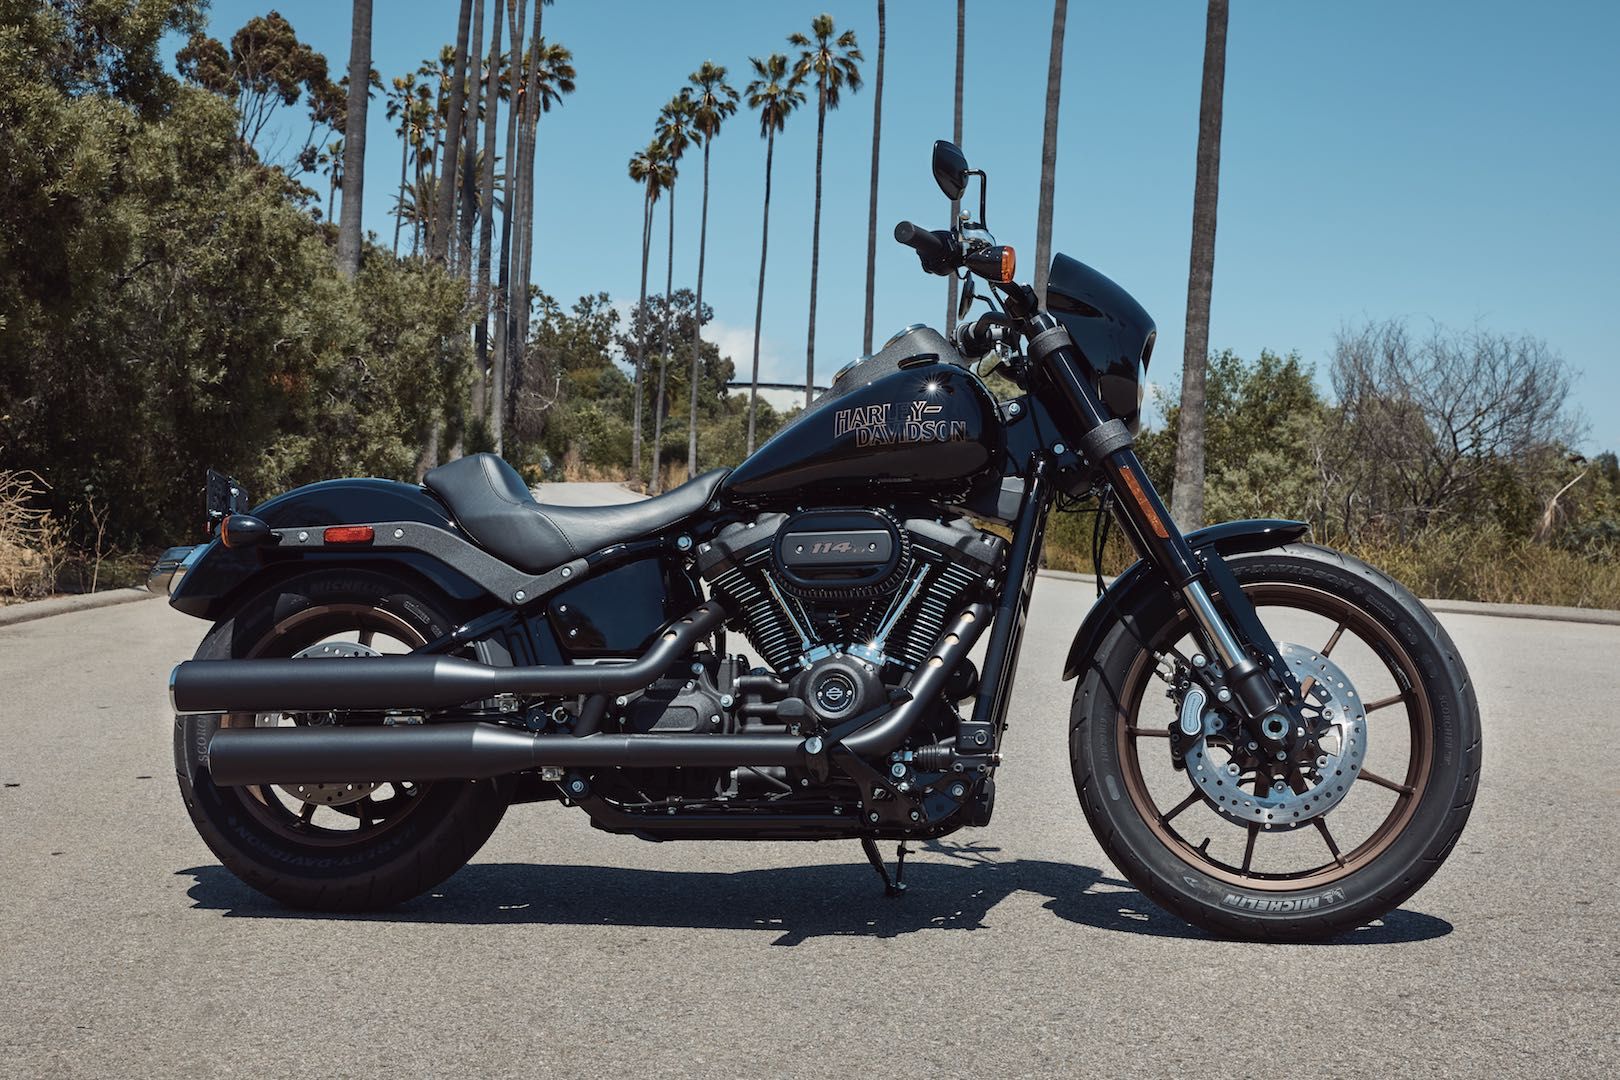 2021 Harley-Davidson Low Rider S (1) in front of palm trees